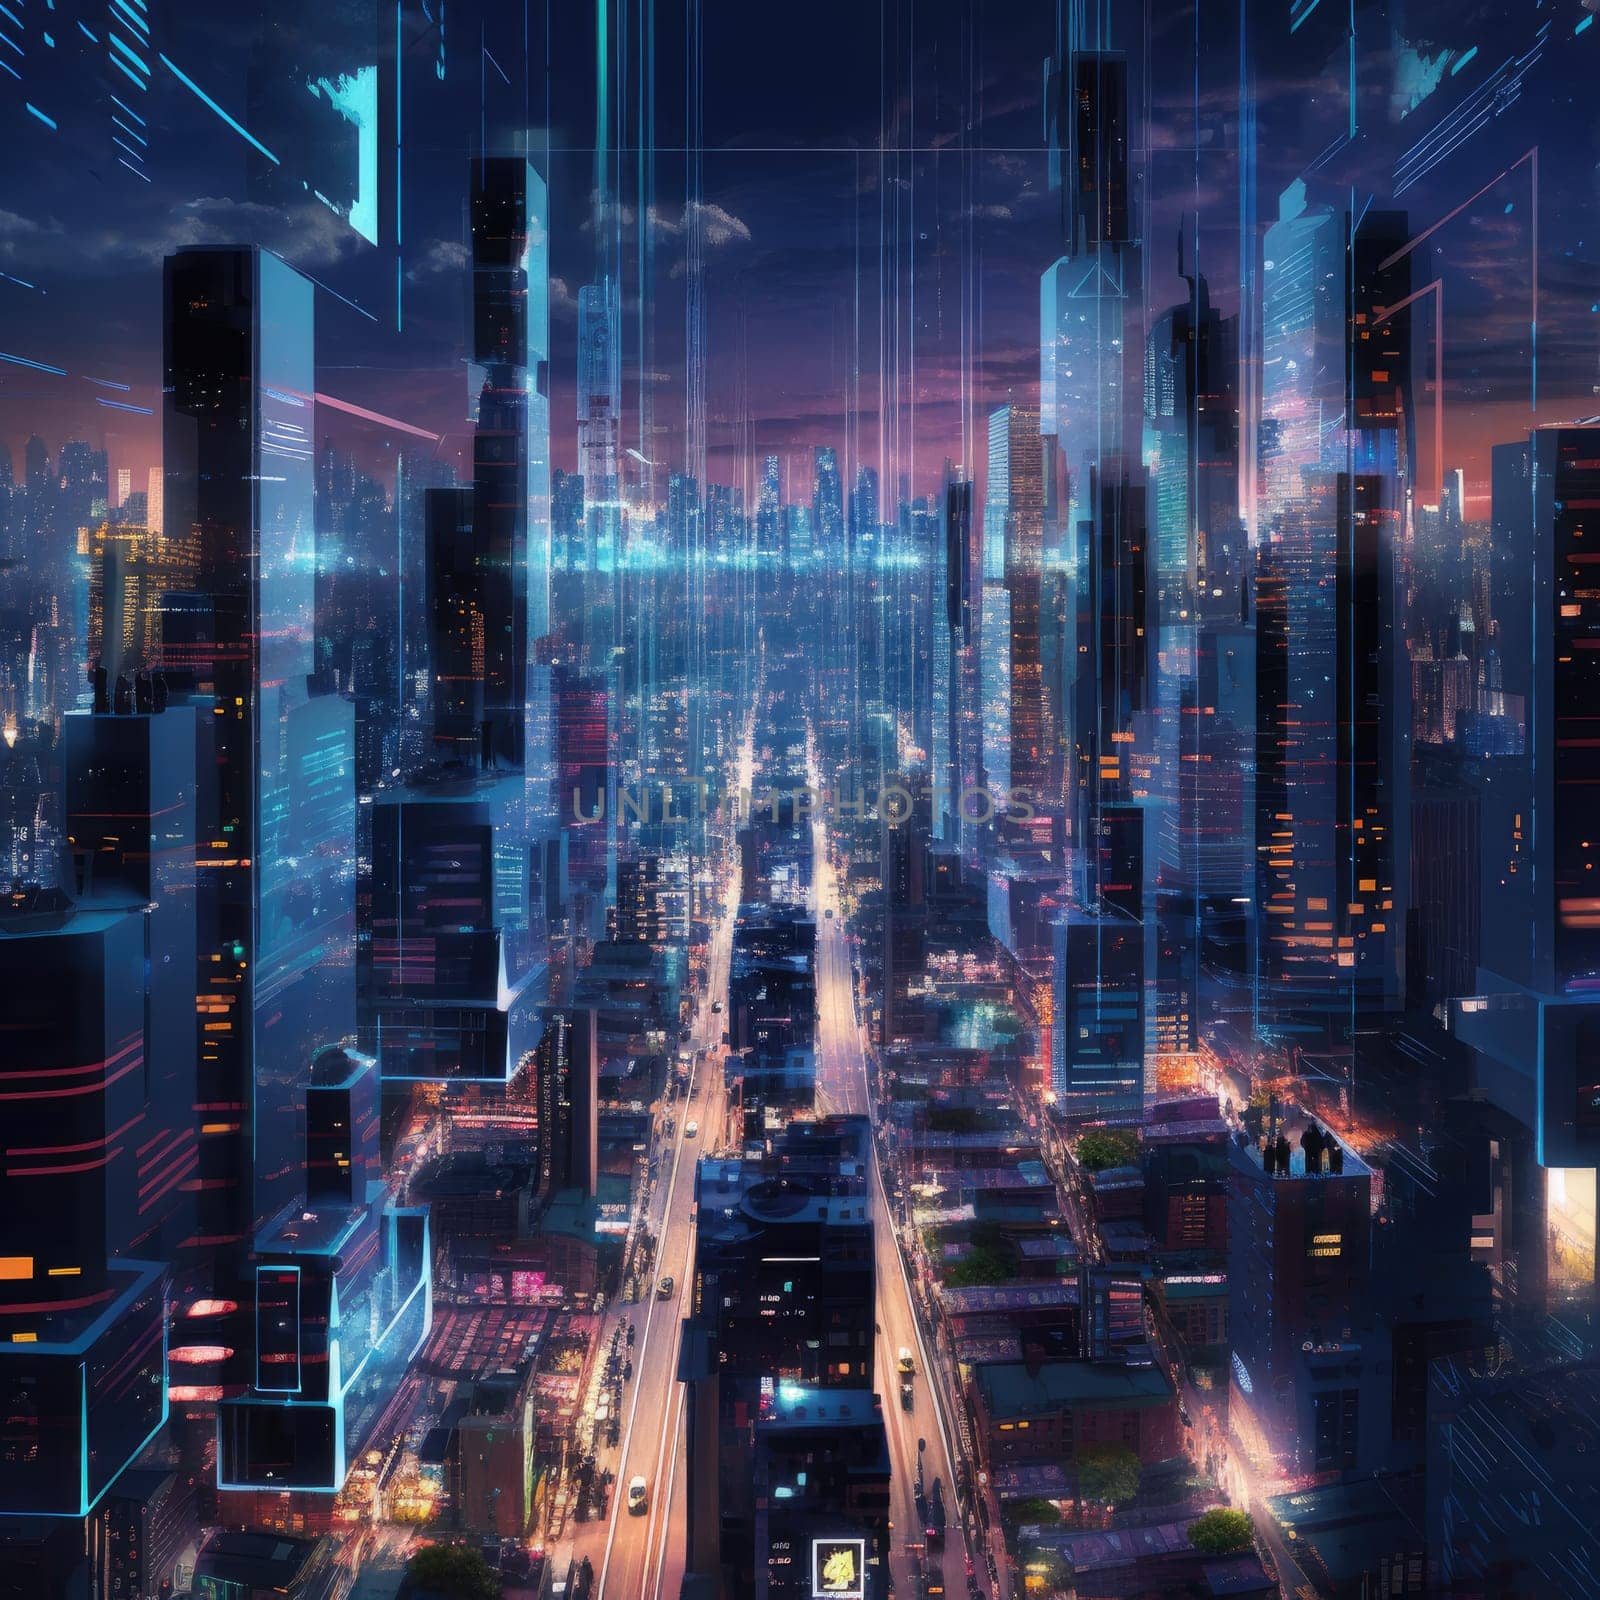 The city of the future with bright lines by cherezoff